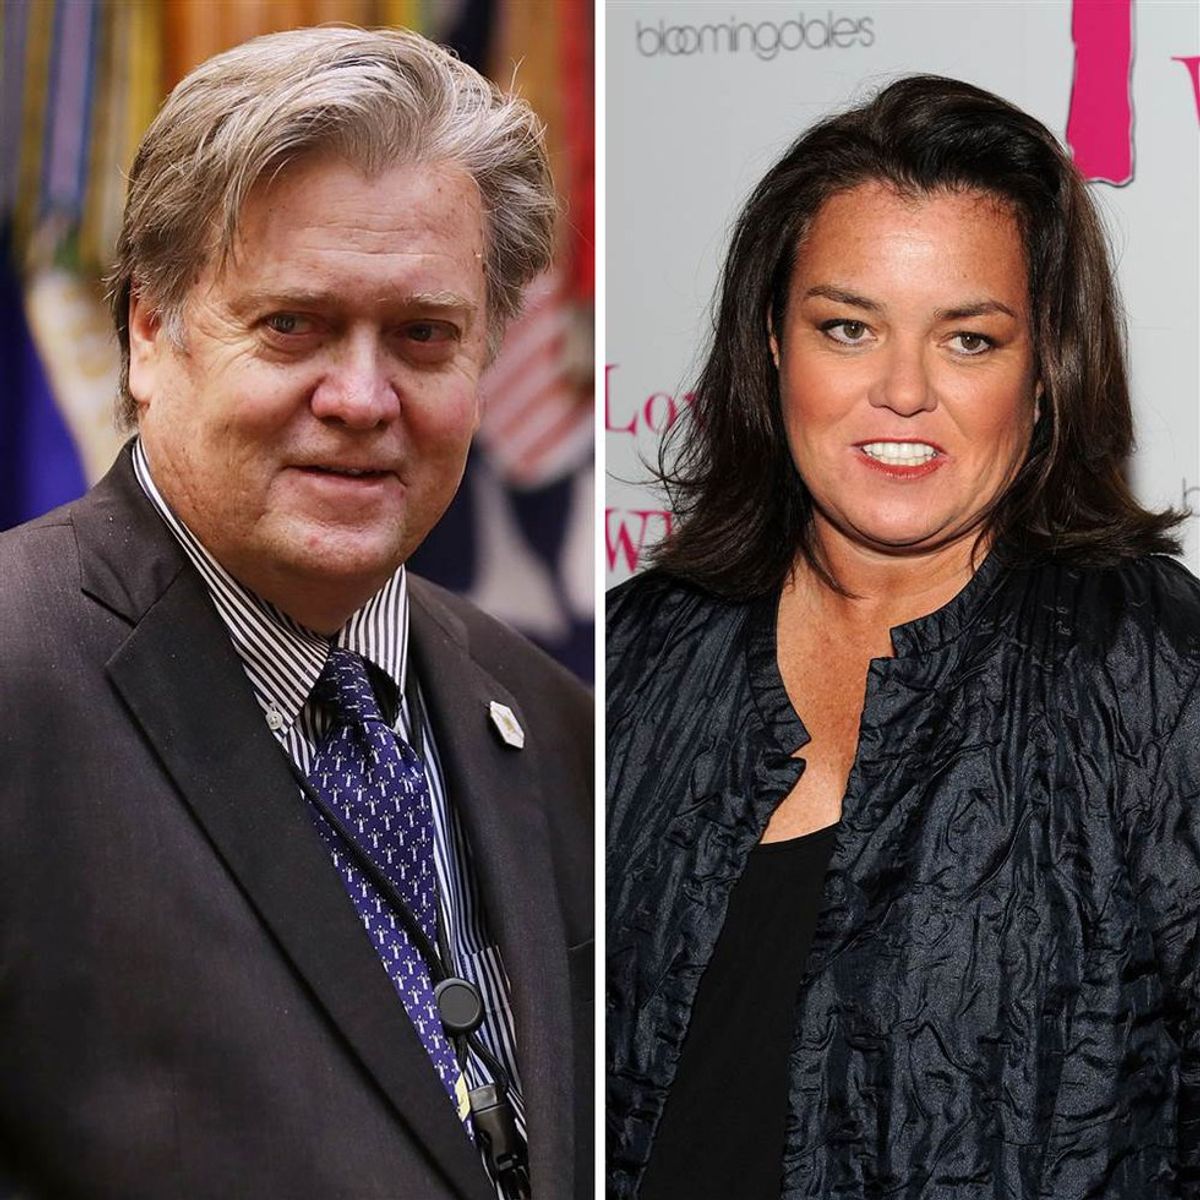 Rosie O'Donnell Is "Here To Serve" Saturday Night Live